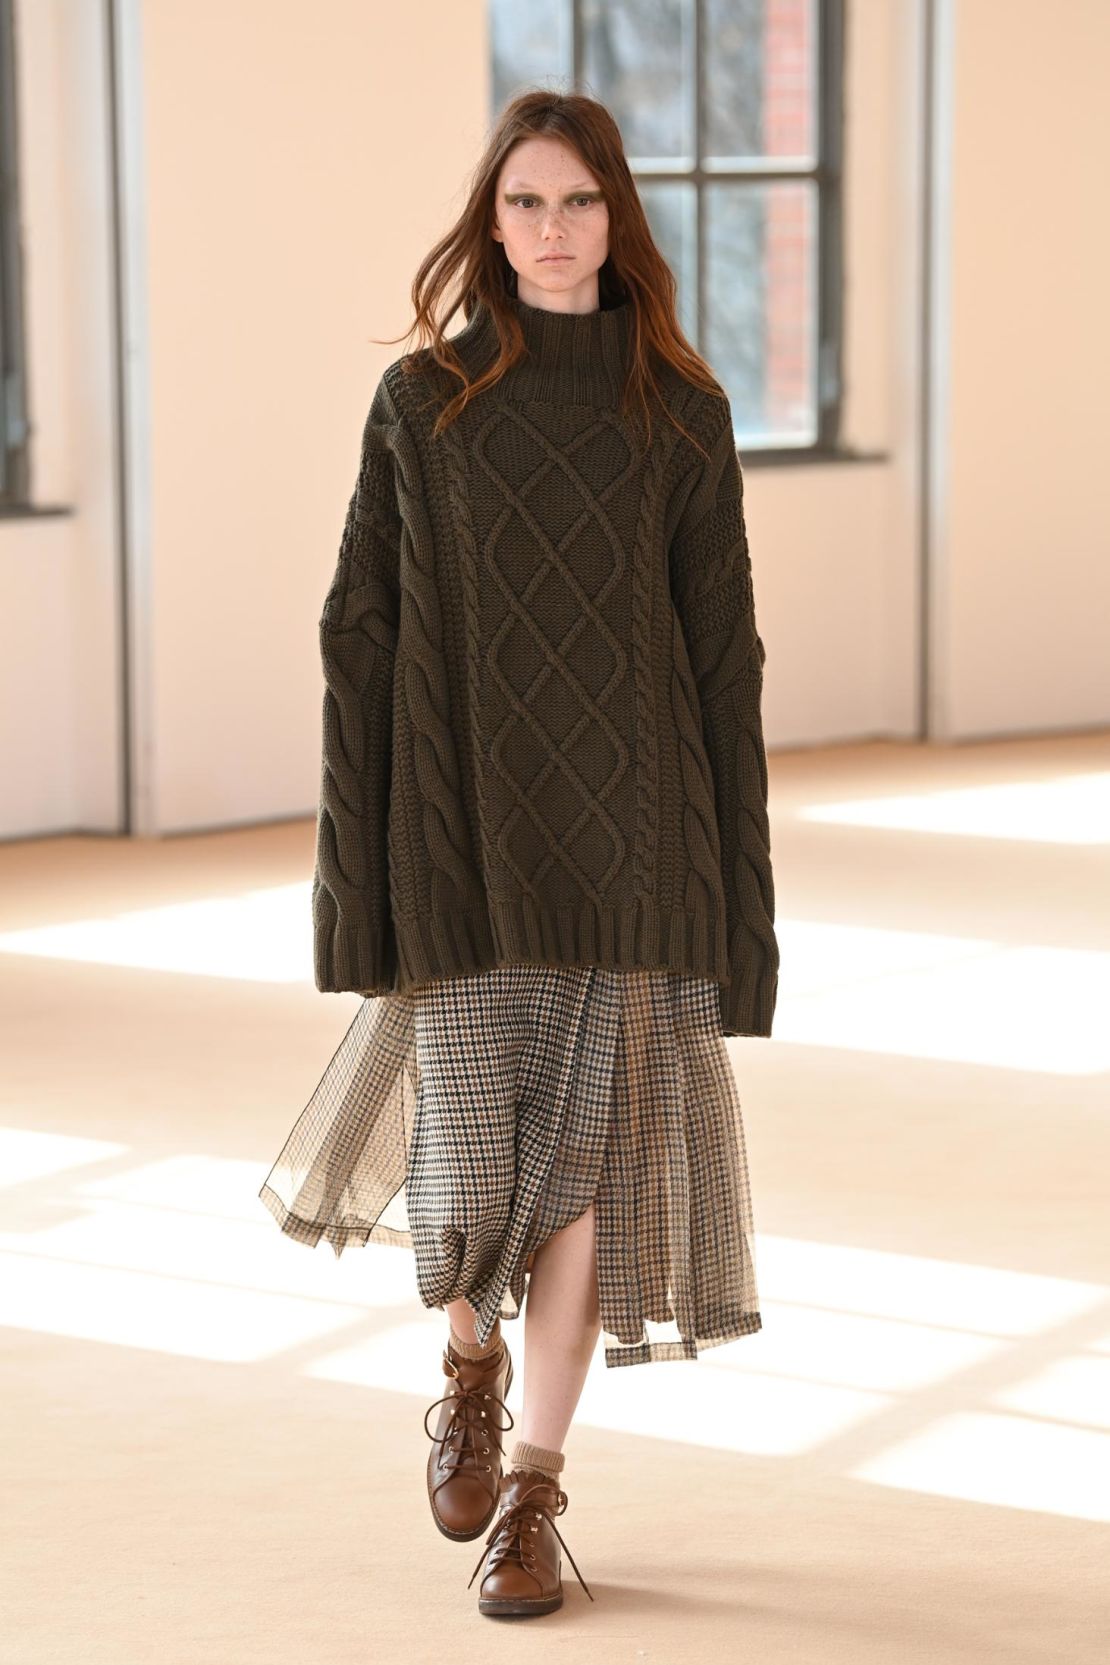 According to the show notes, the collection is an "urban country-mix" with cocooning aran knits and slouchy tartan skirts.